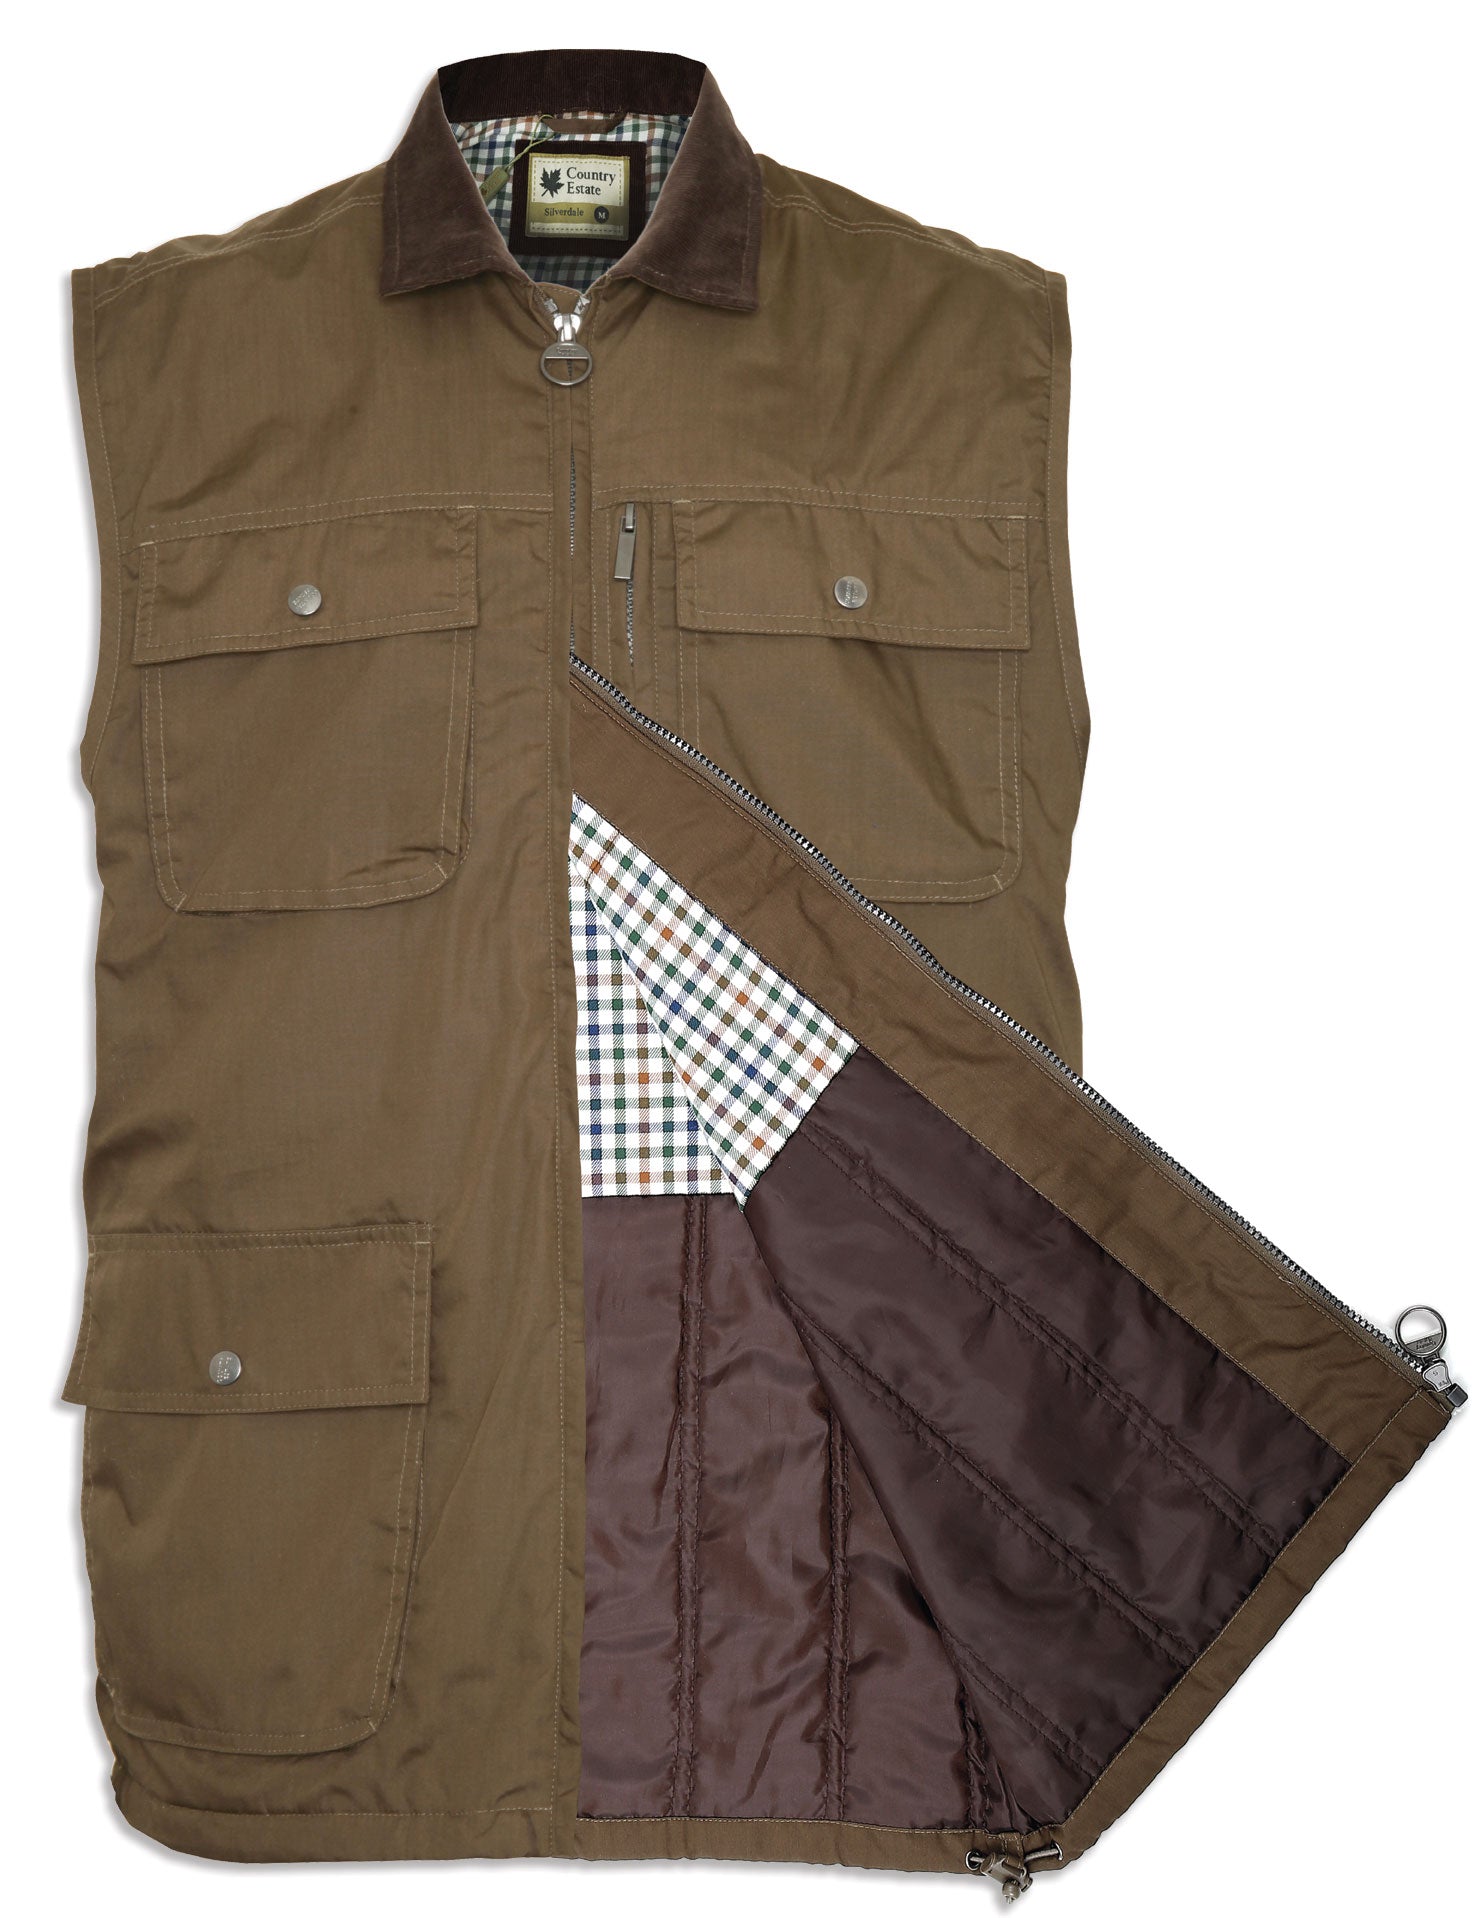 showing lining navy Silverdale Multi Pocket Waistcoat from Champion Outdoor